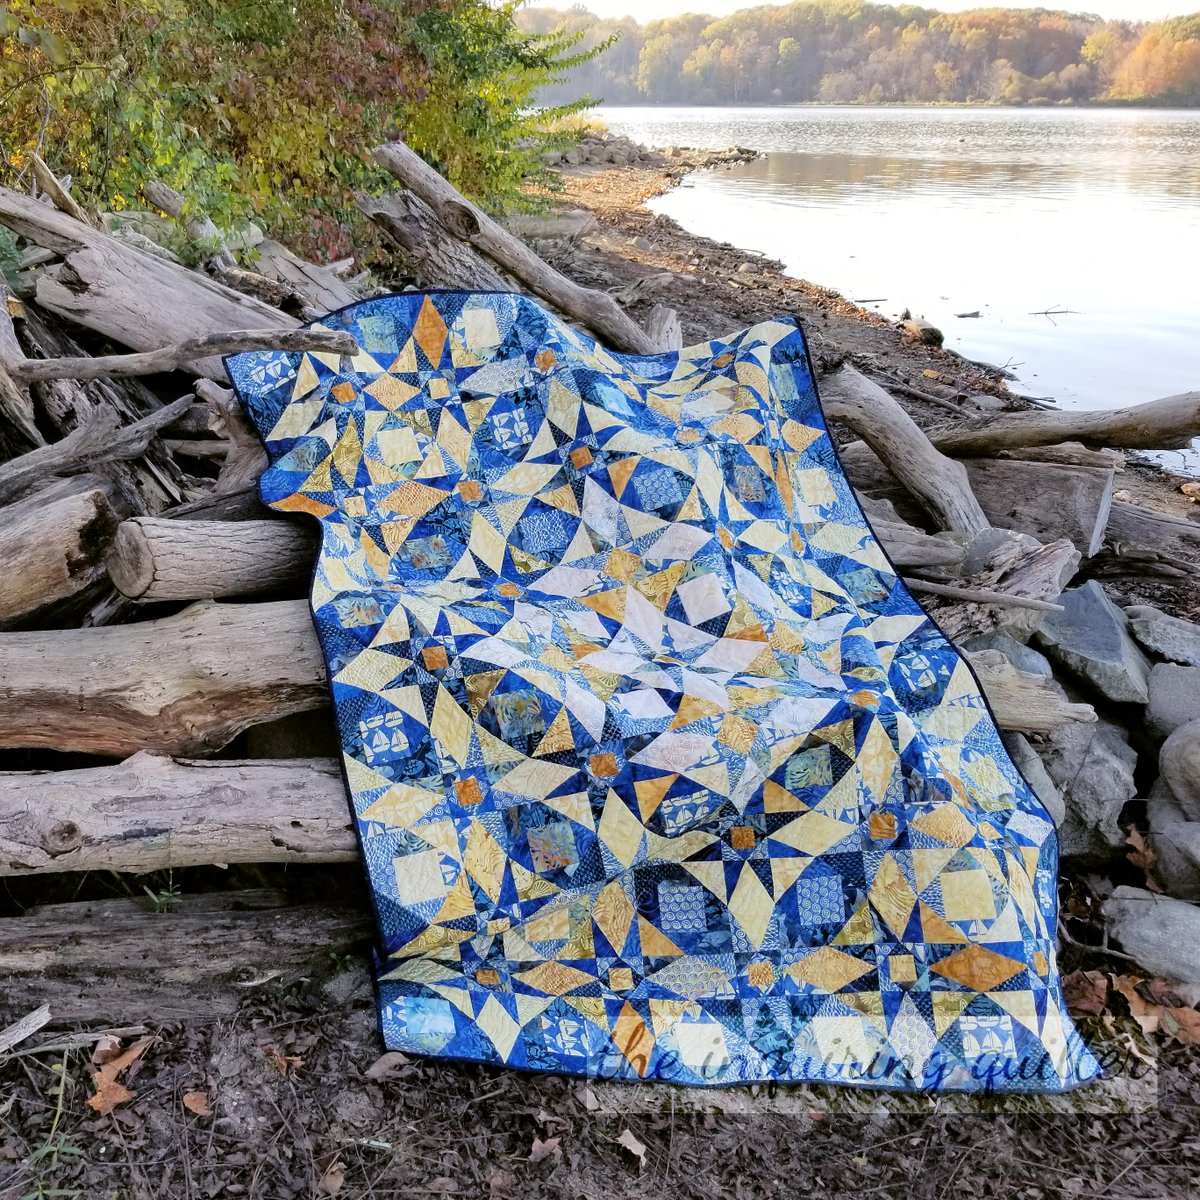 Don't miss my quilt for the @IslandBatik Storm at Sea Blog Hop! When you stop by, be sure to enter my giveaway!

inquiringquilter.com/questions/2021…

#inquiringquilter #islandbatikambassador #islandbatik #iloveislandbatik #stormatseabloghop #stormatseablock #stormatseaquilt